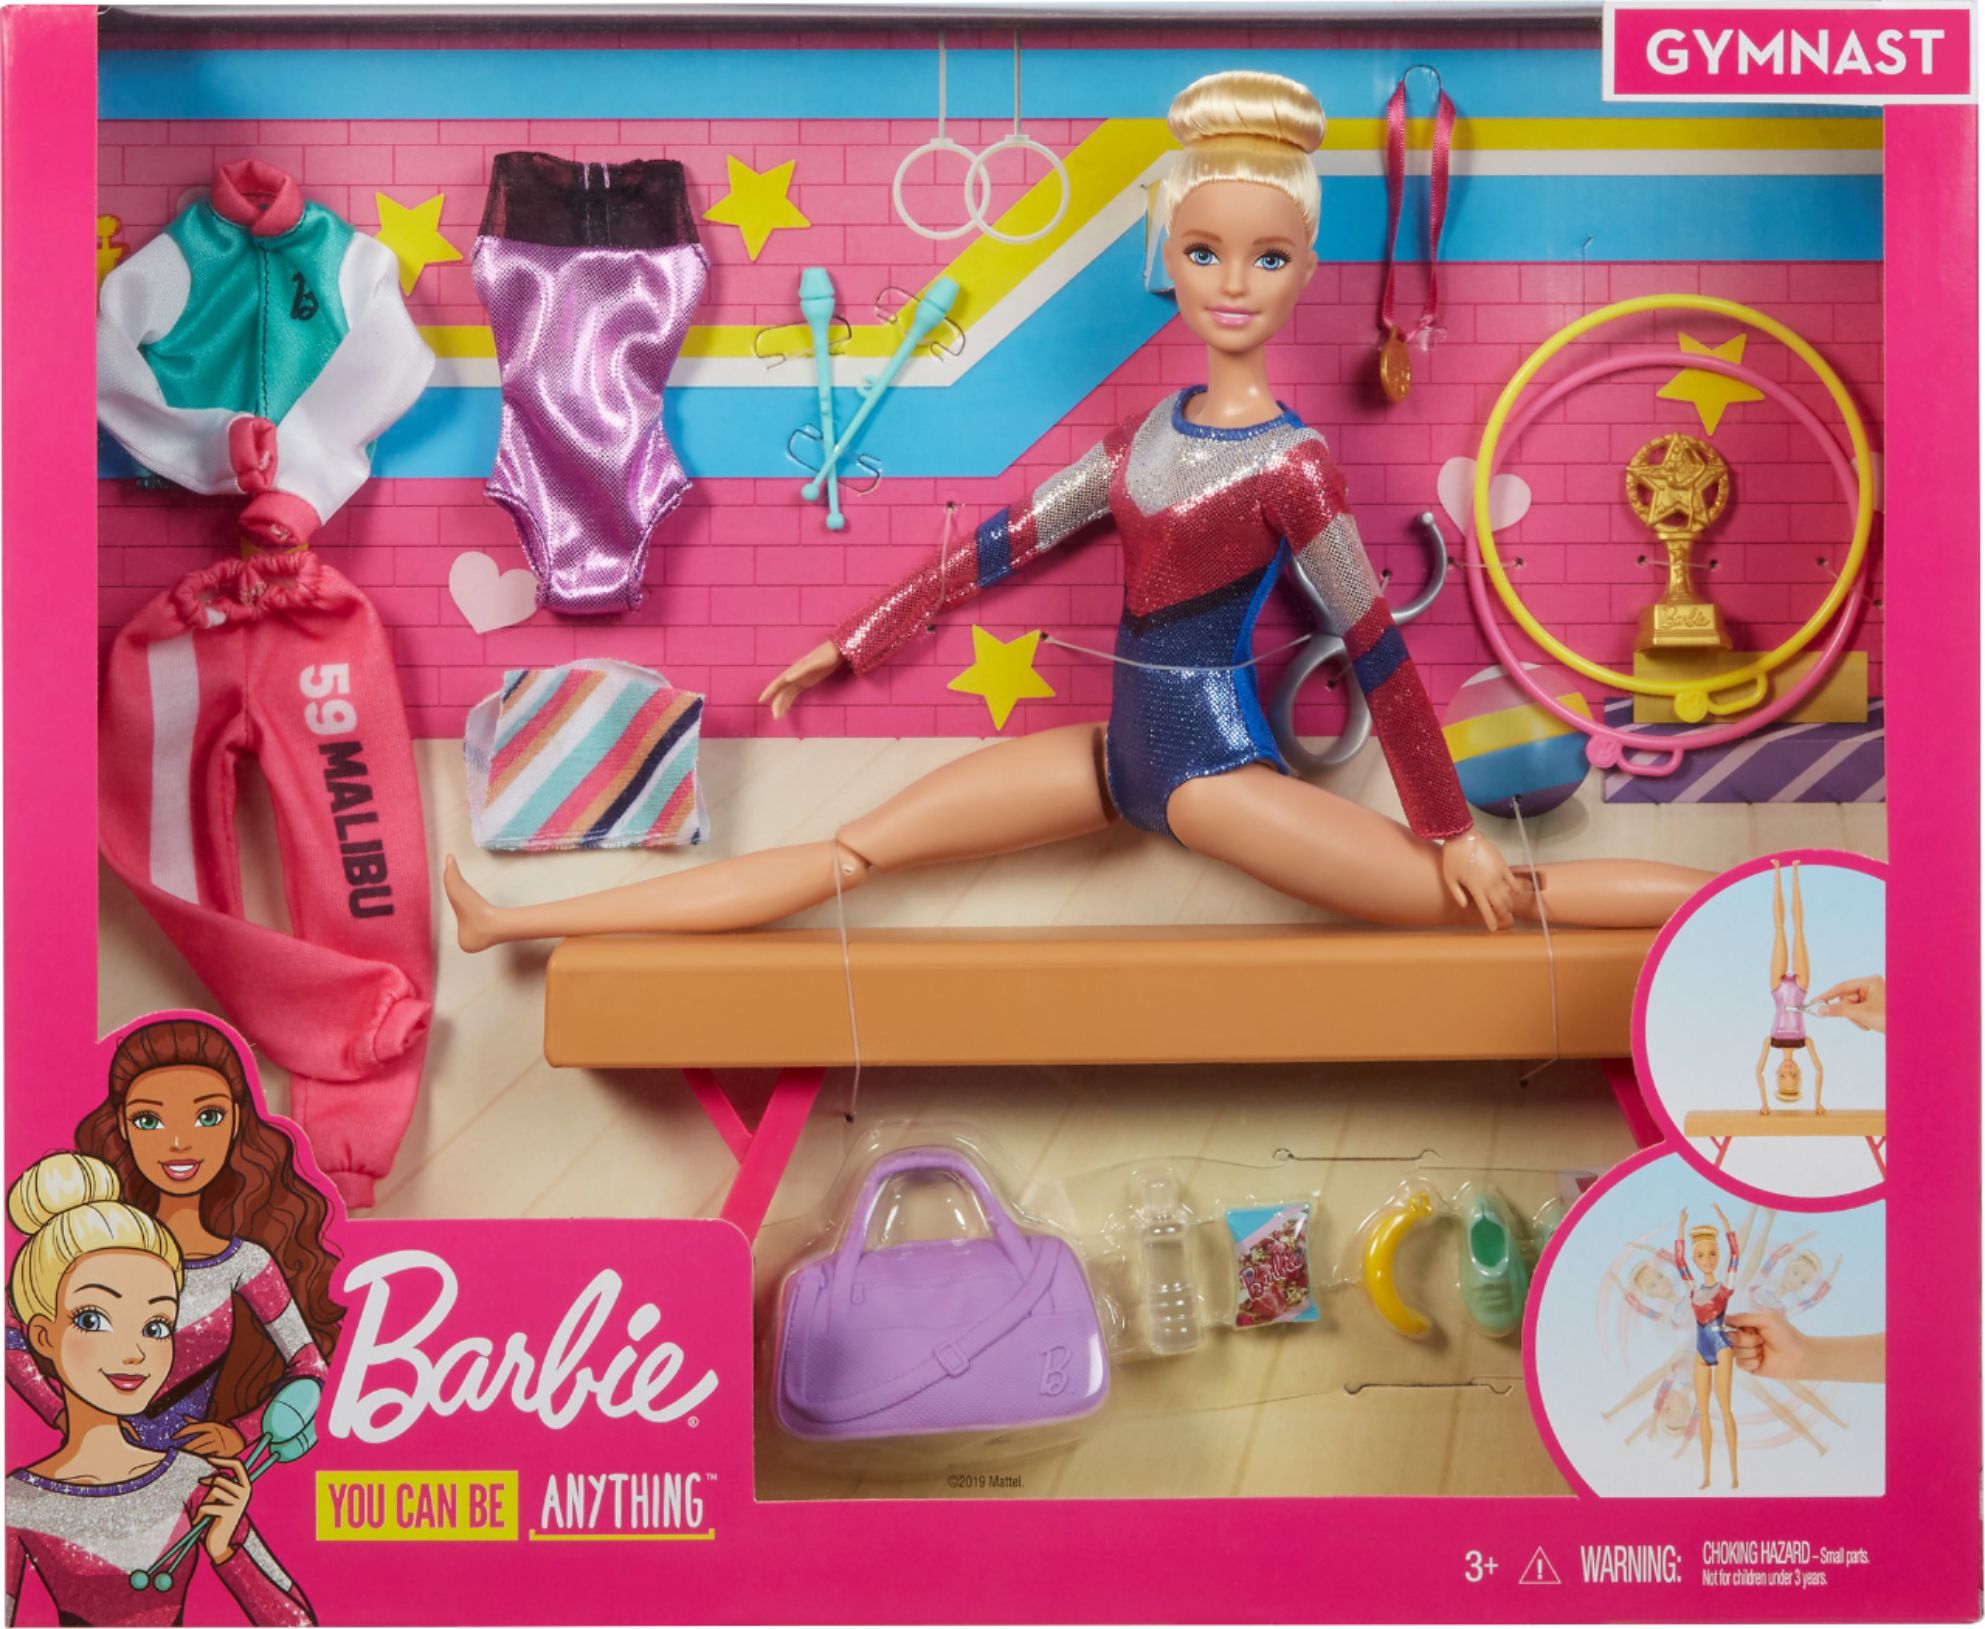 NEW OFFICIAL BARBIE GYMNAST DOLL AND ACCESSORIES 